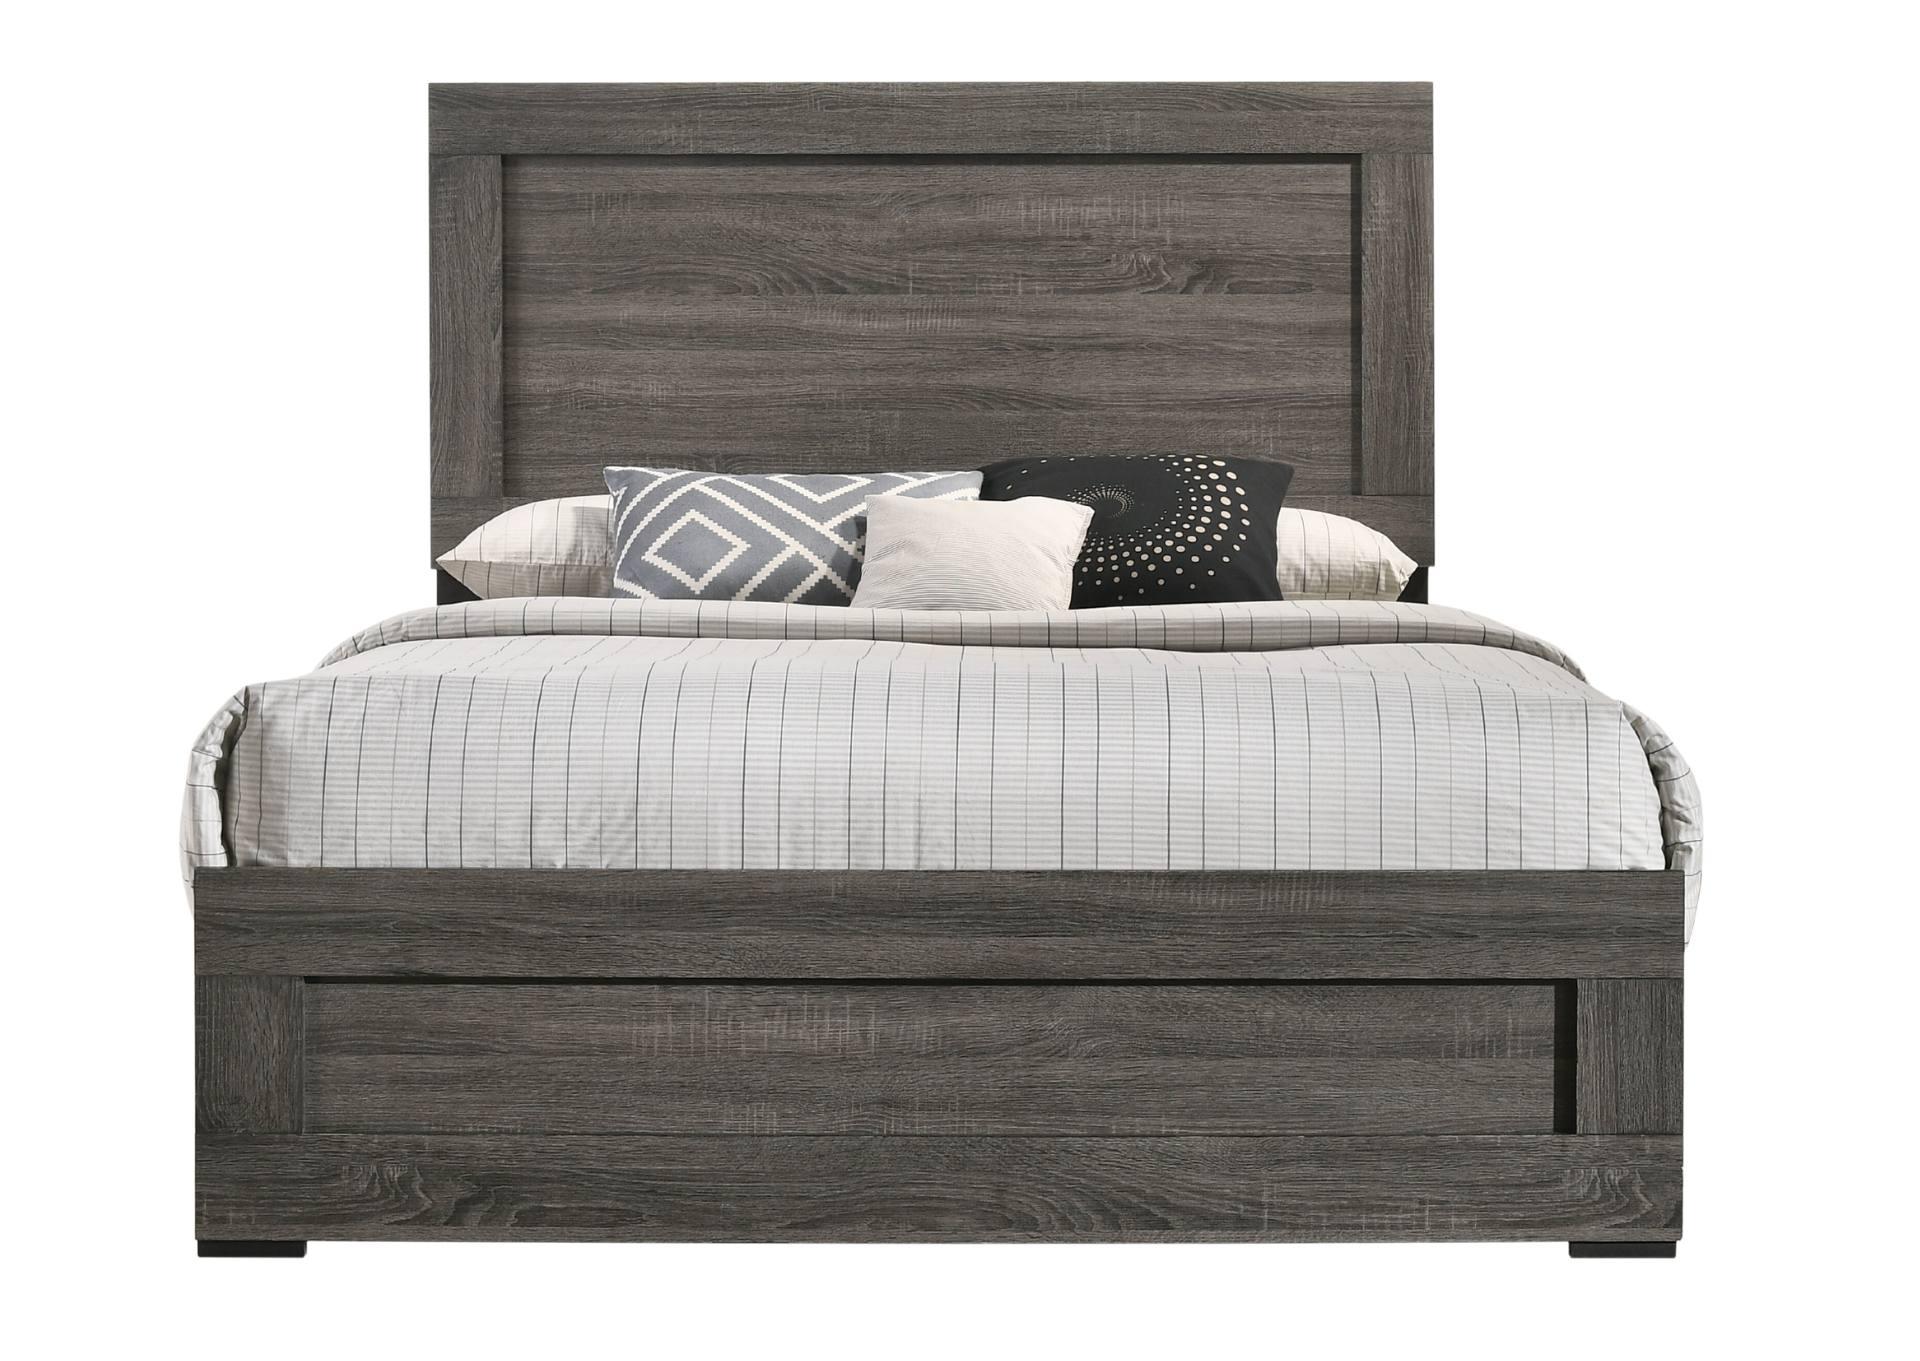 AMELIE GREY FULL BED,LIFESTYLE FURNITURE